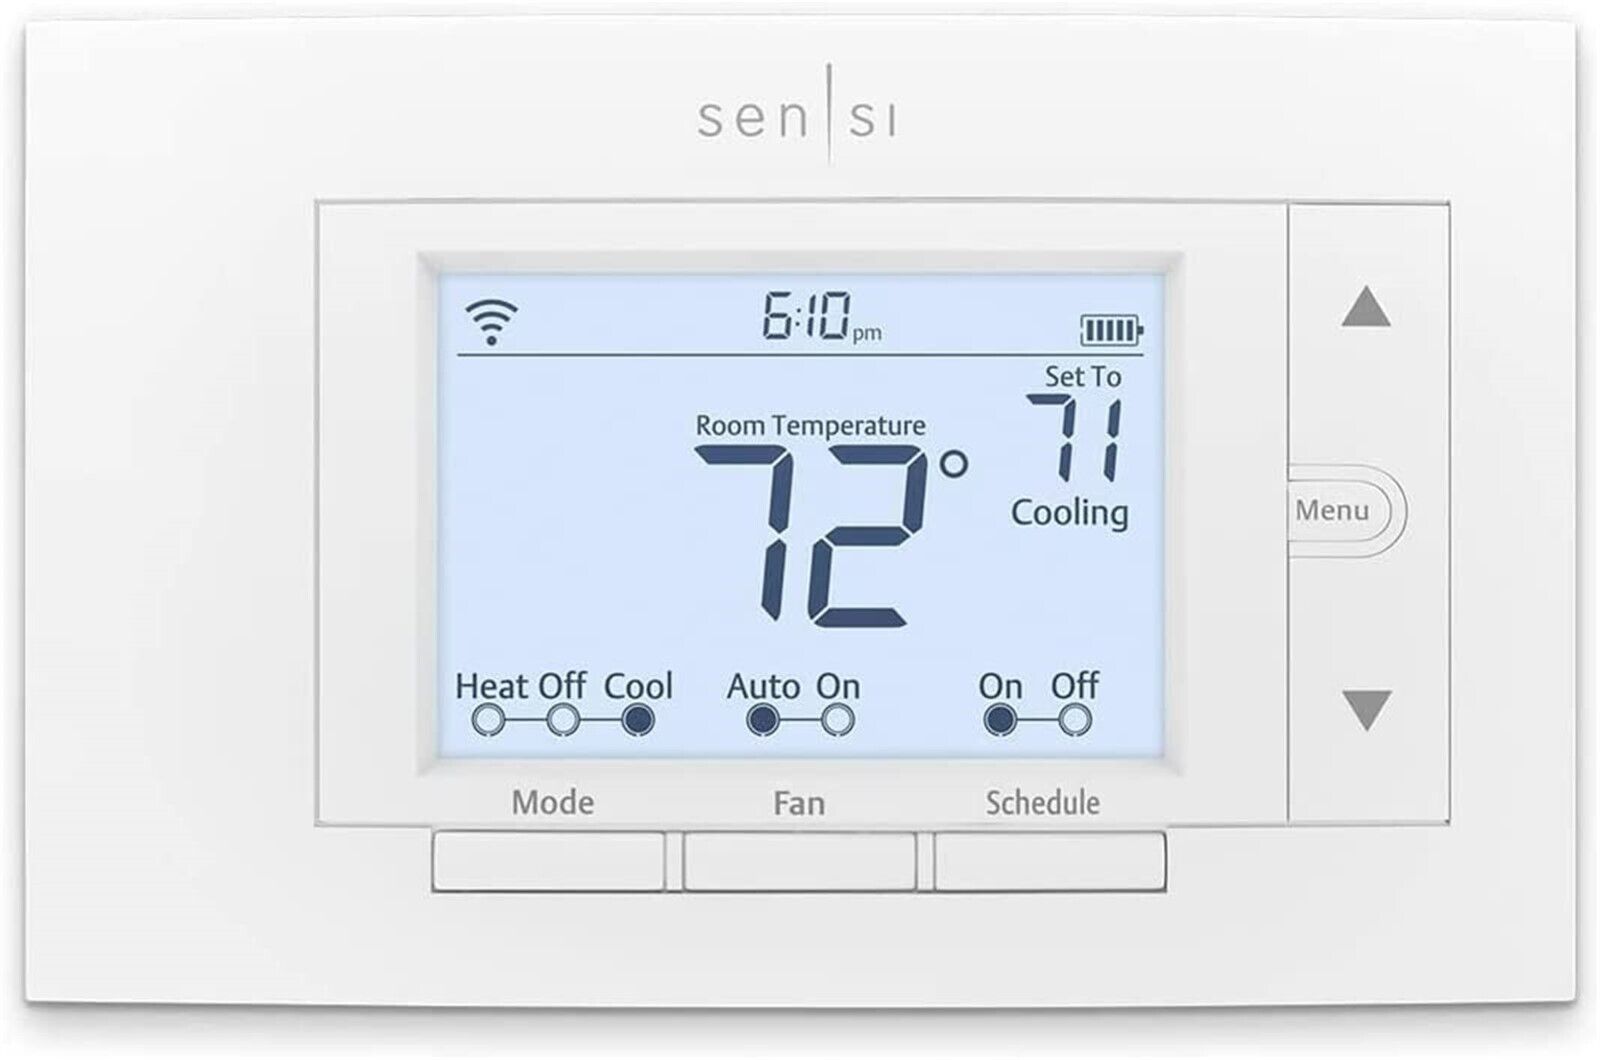 How To Reset Sensi Smart Thermostat